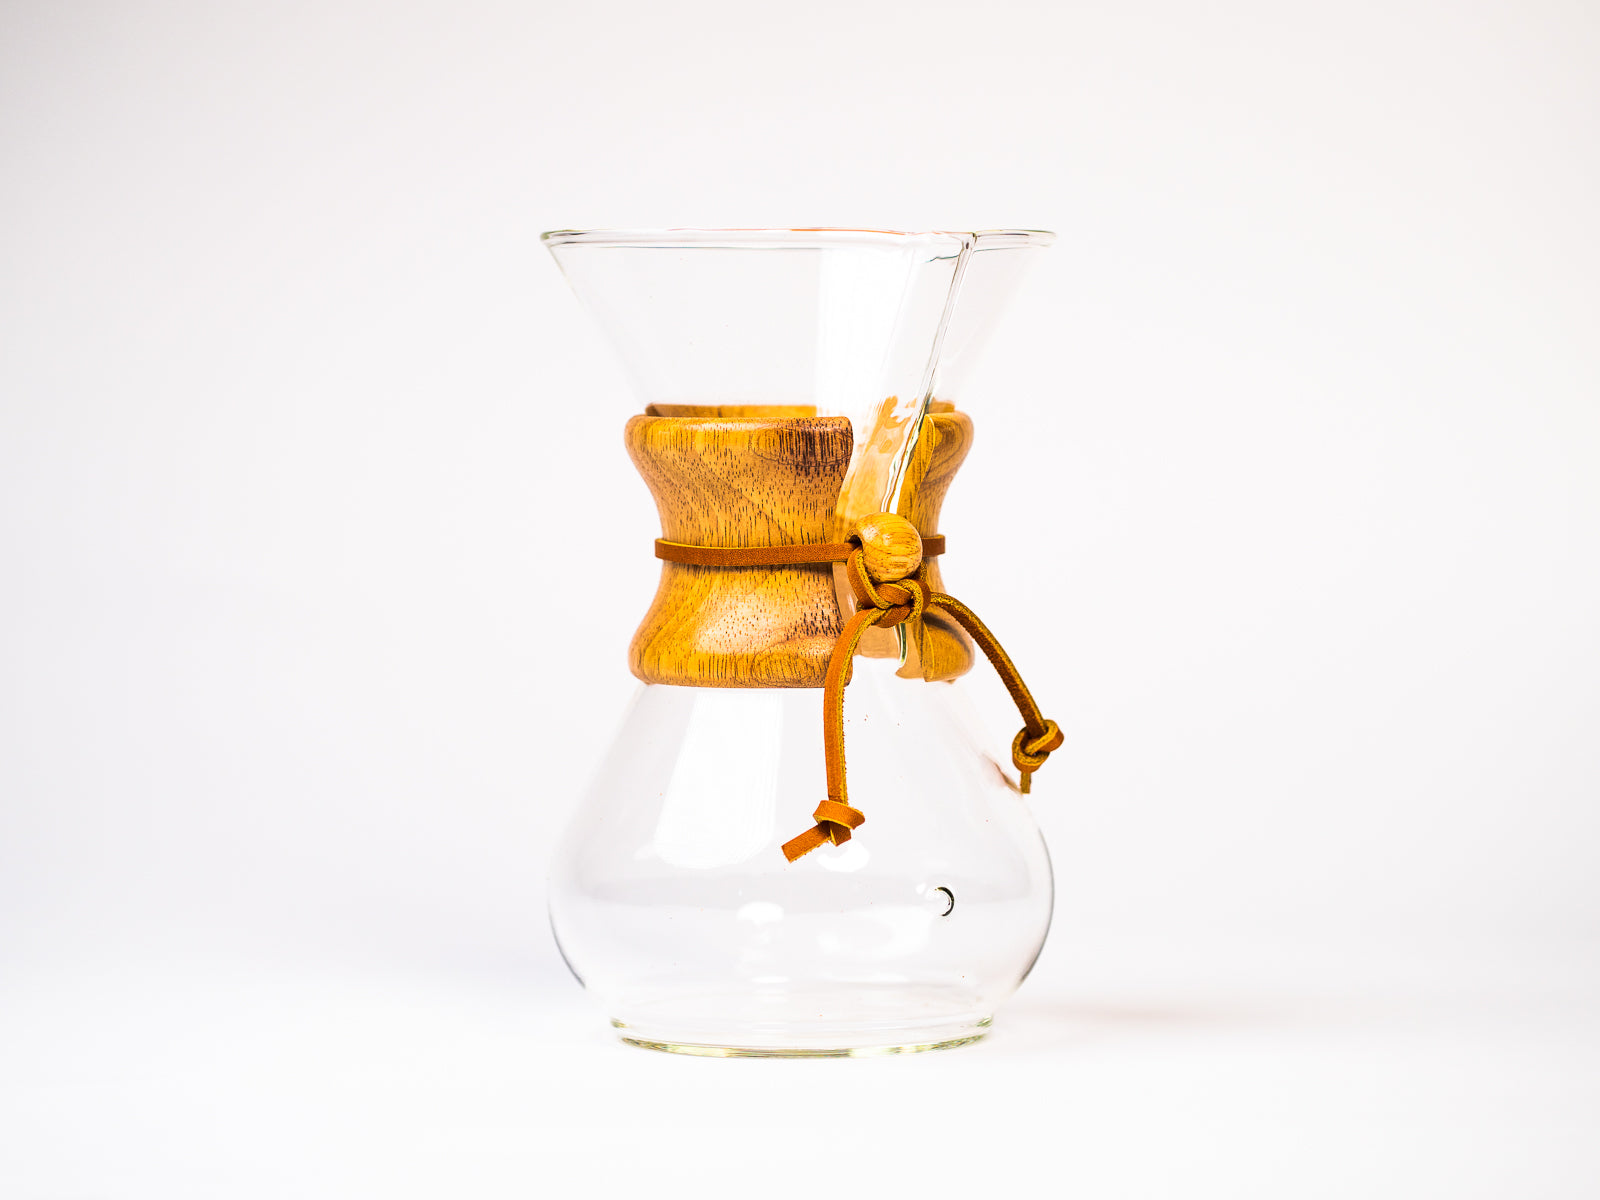 Chemex Pour Over Coffeemaker Glass